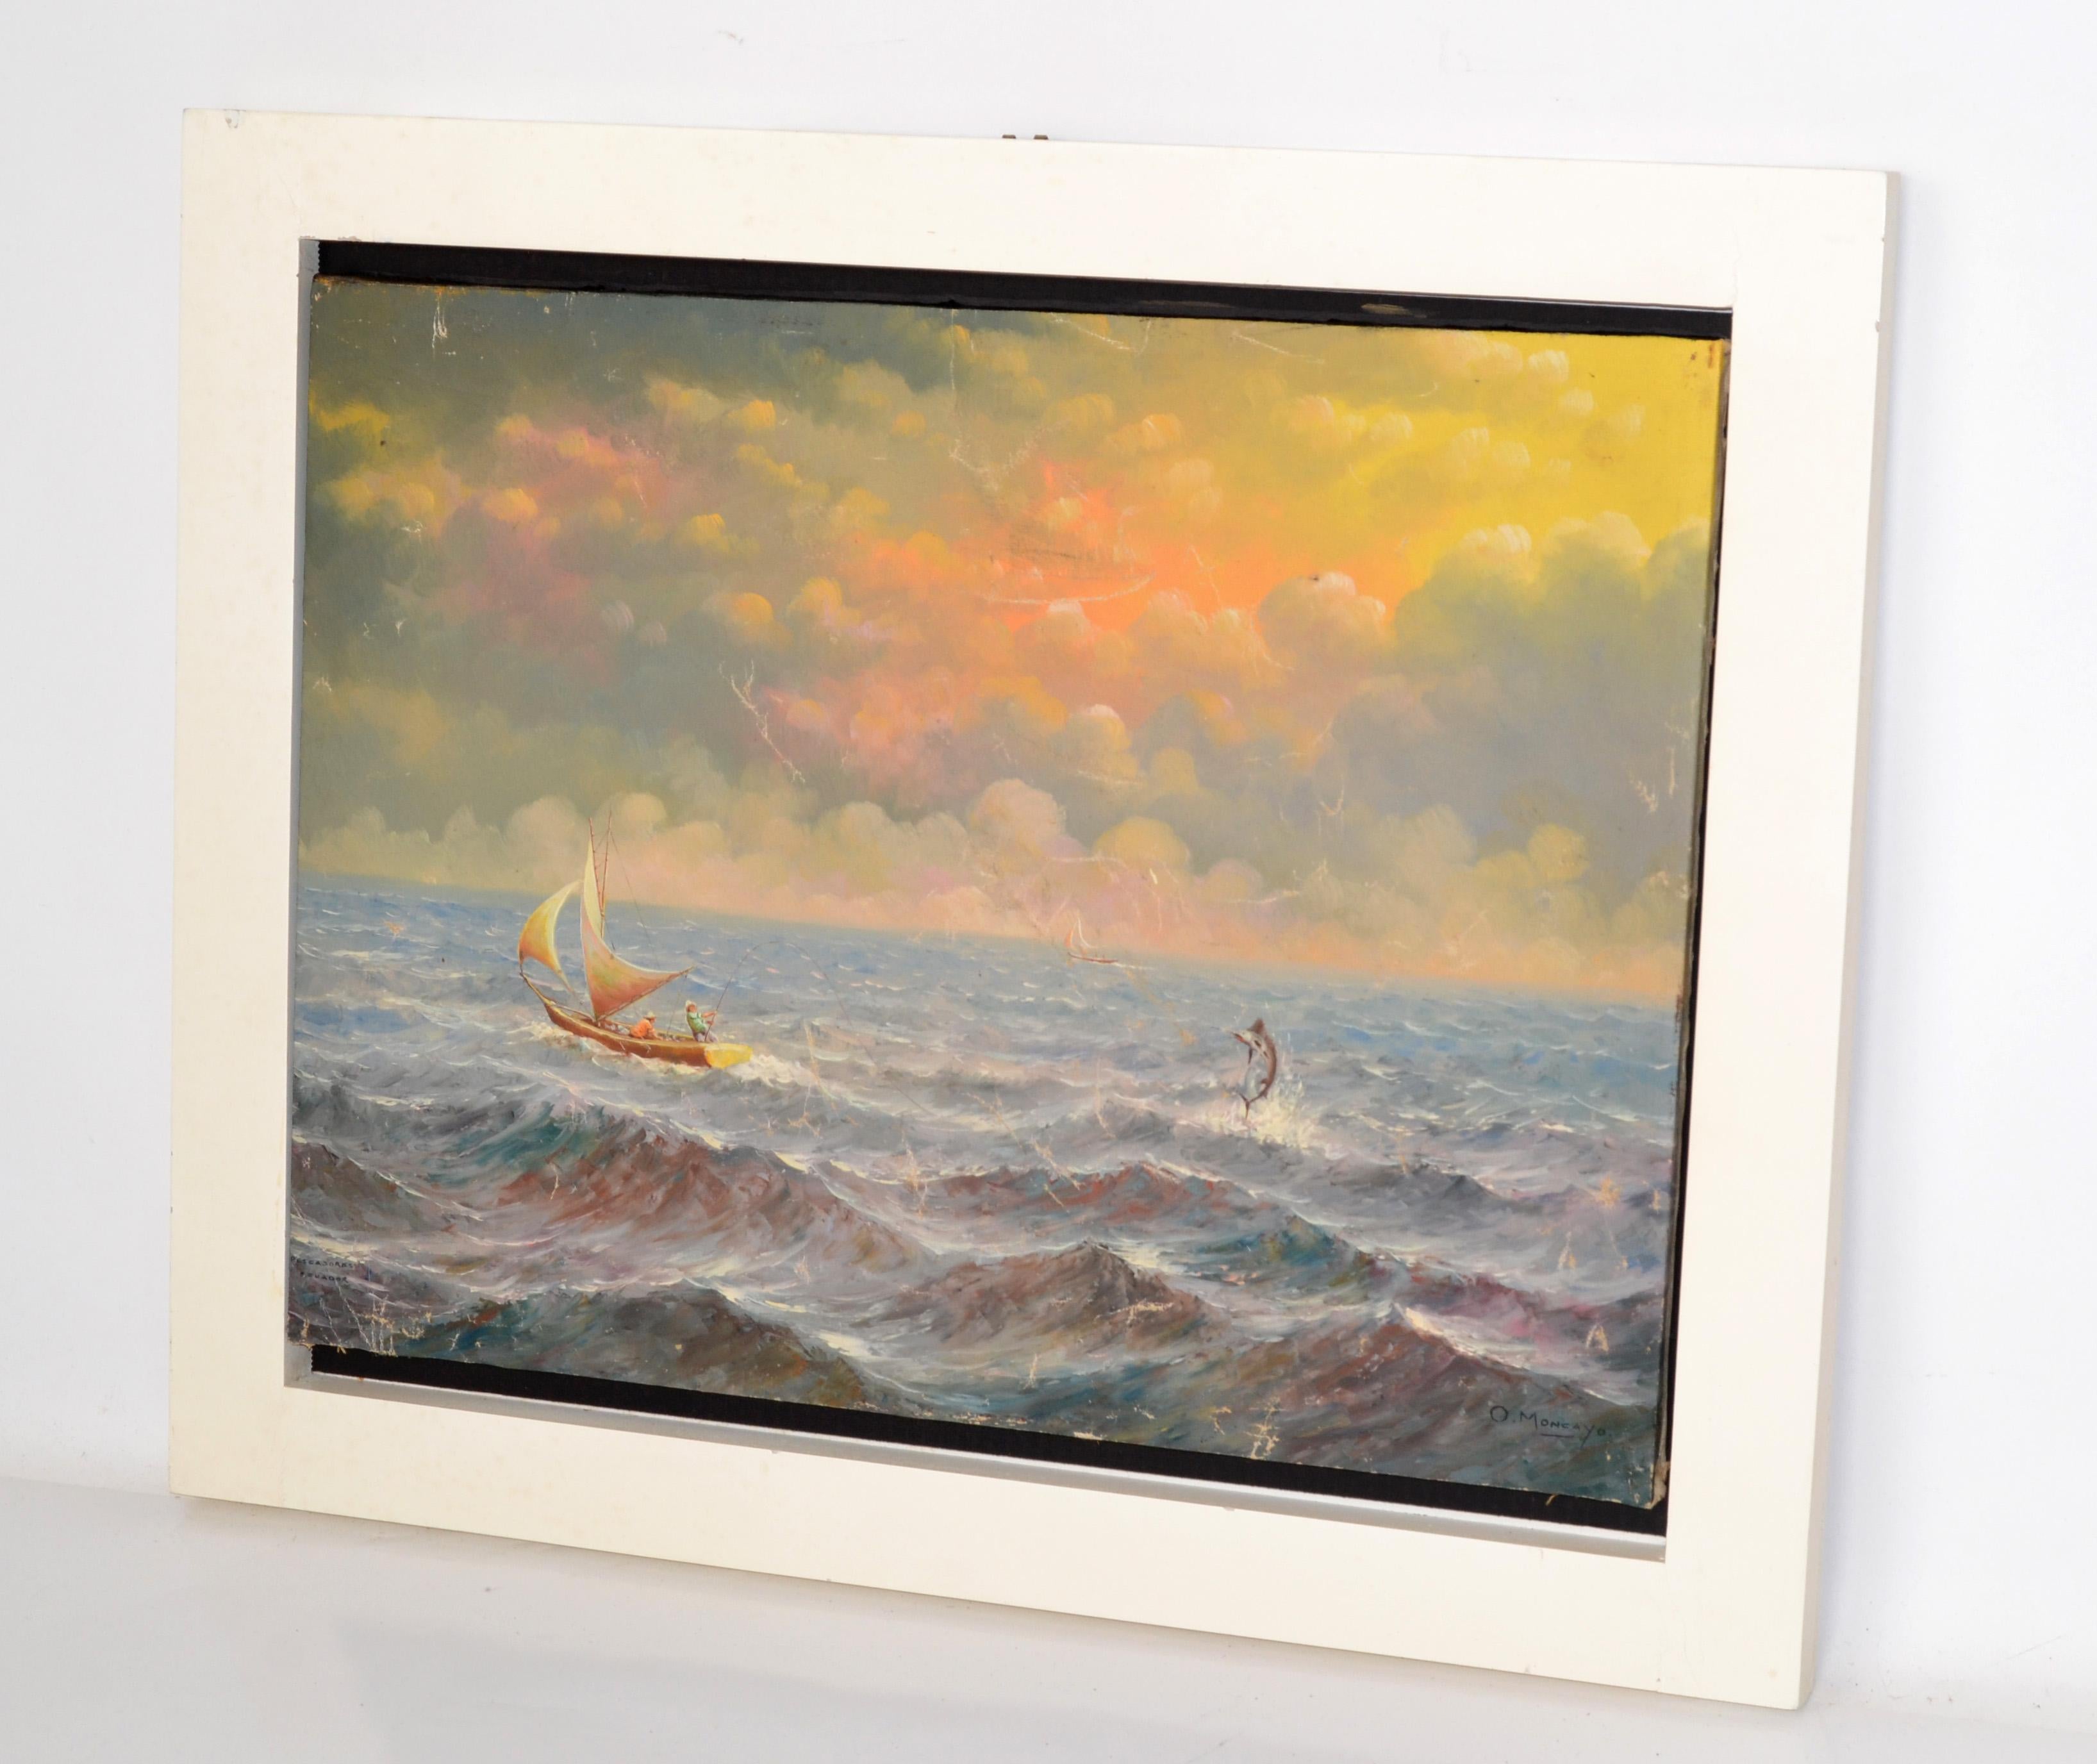 White Framed O. Moncayo Seascape Painting Acrylic on Canvas Mid-Century Modern   For Sale 5